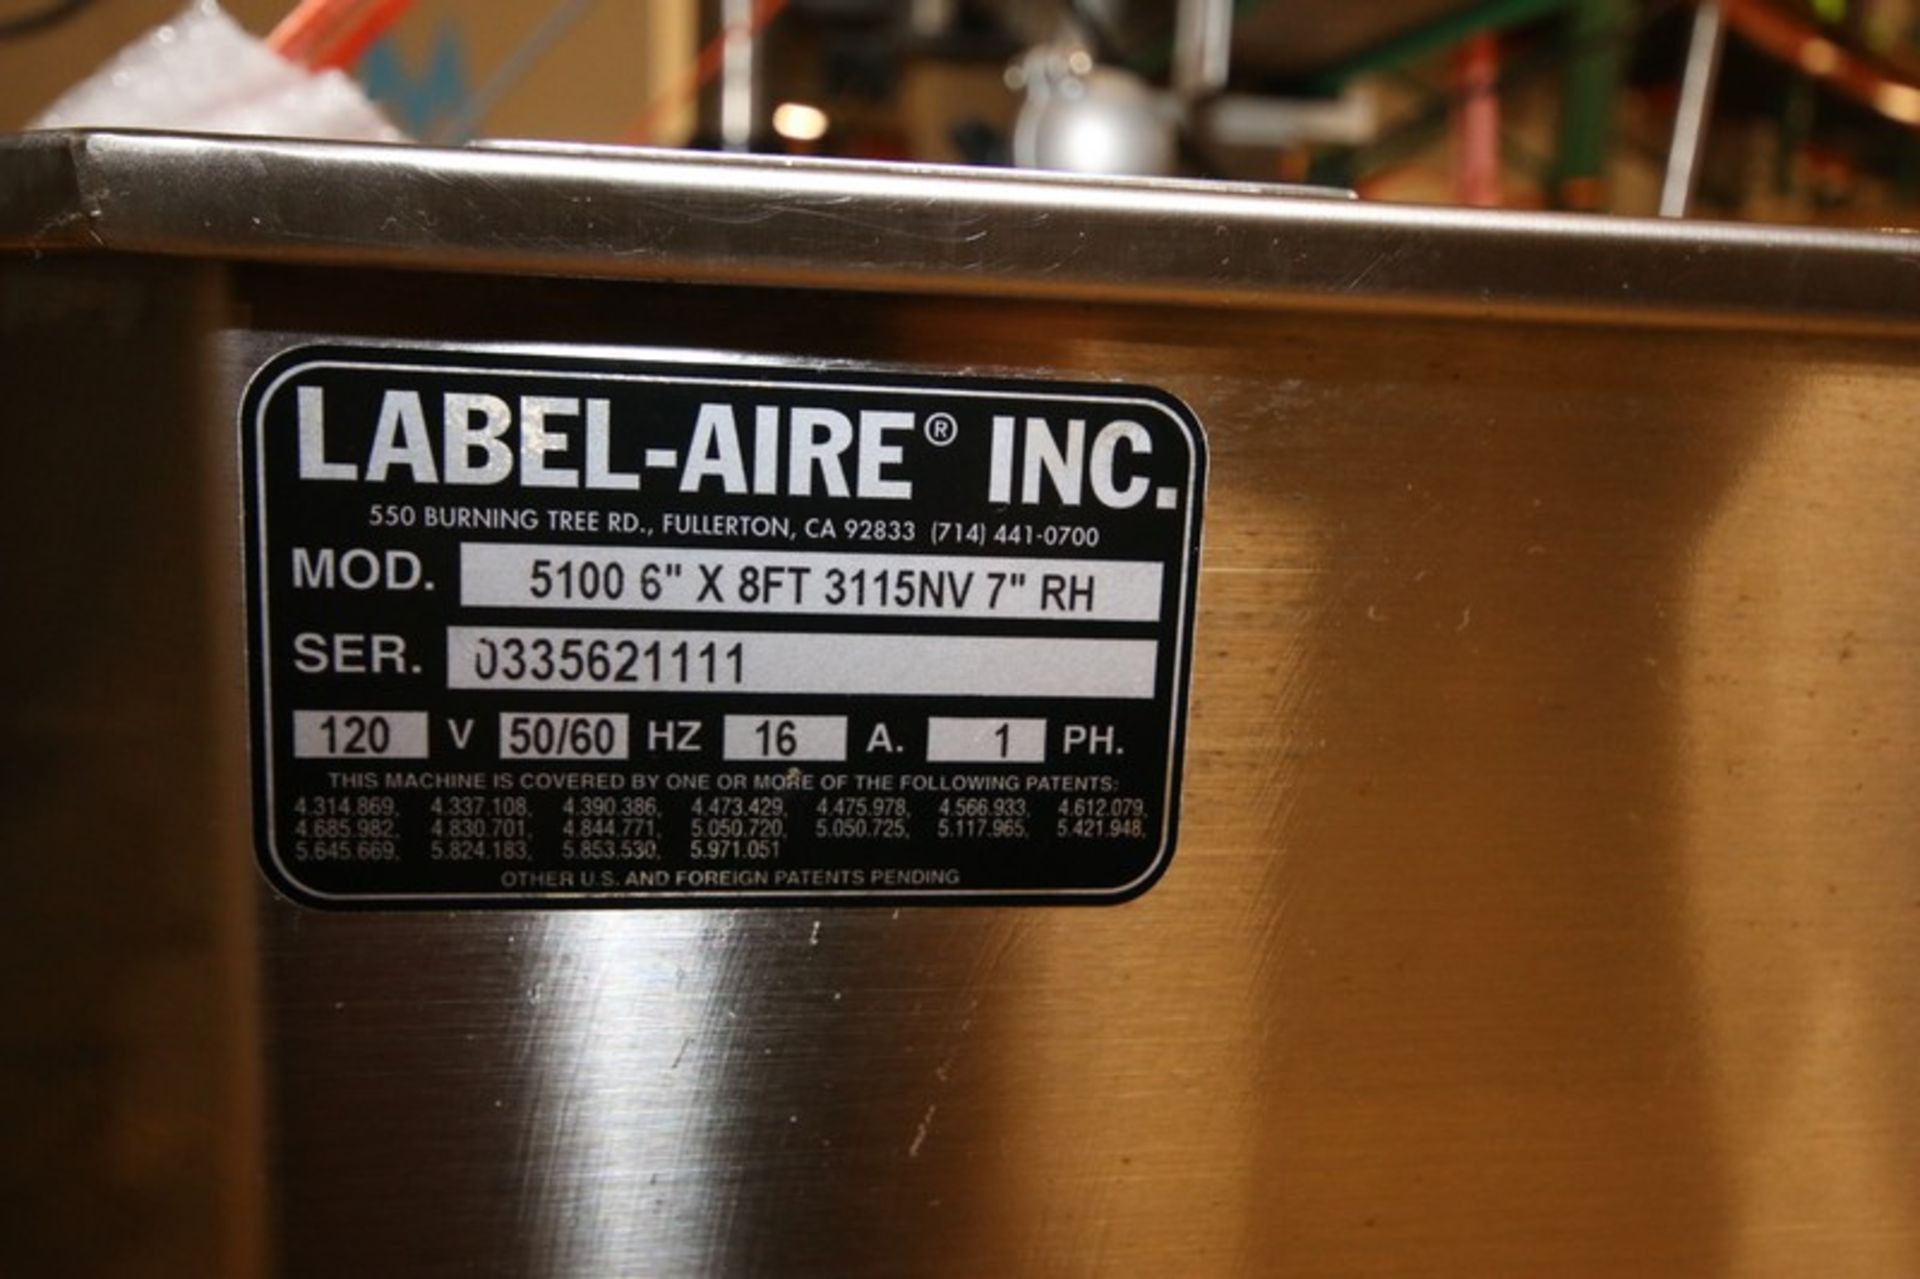 Labeler-Aire Inline S/S Labeling System, Model 5100 6" x 8' 3115NV 7" RH, SN 0335621111, with 6" W x - Image 13 of 14